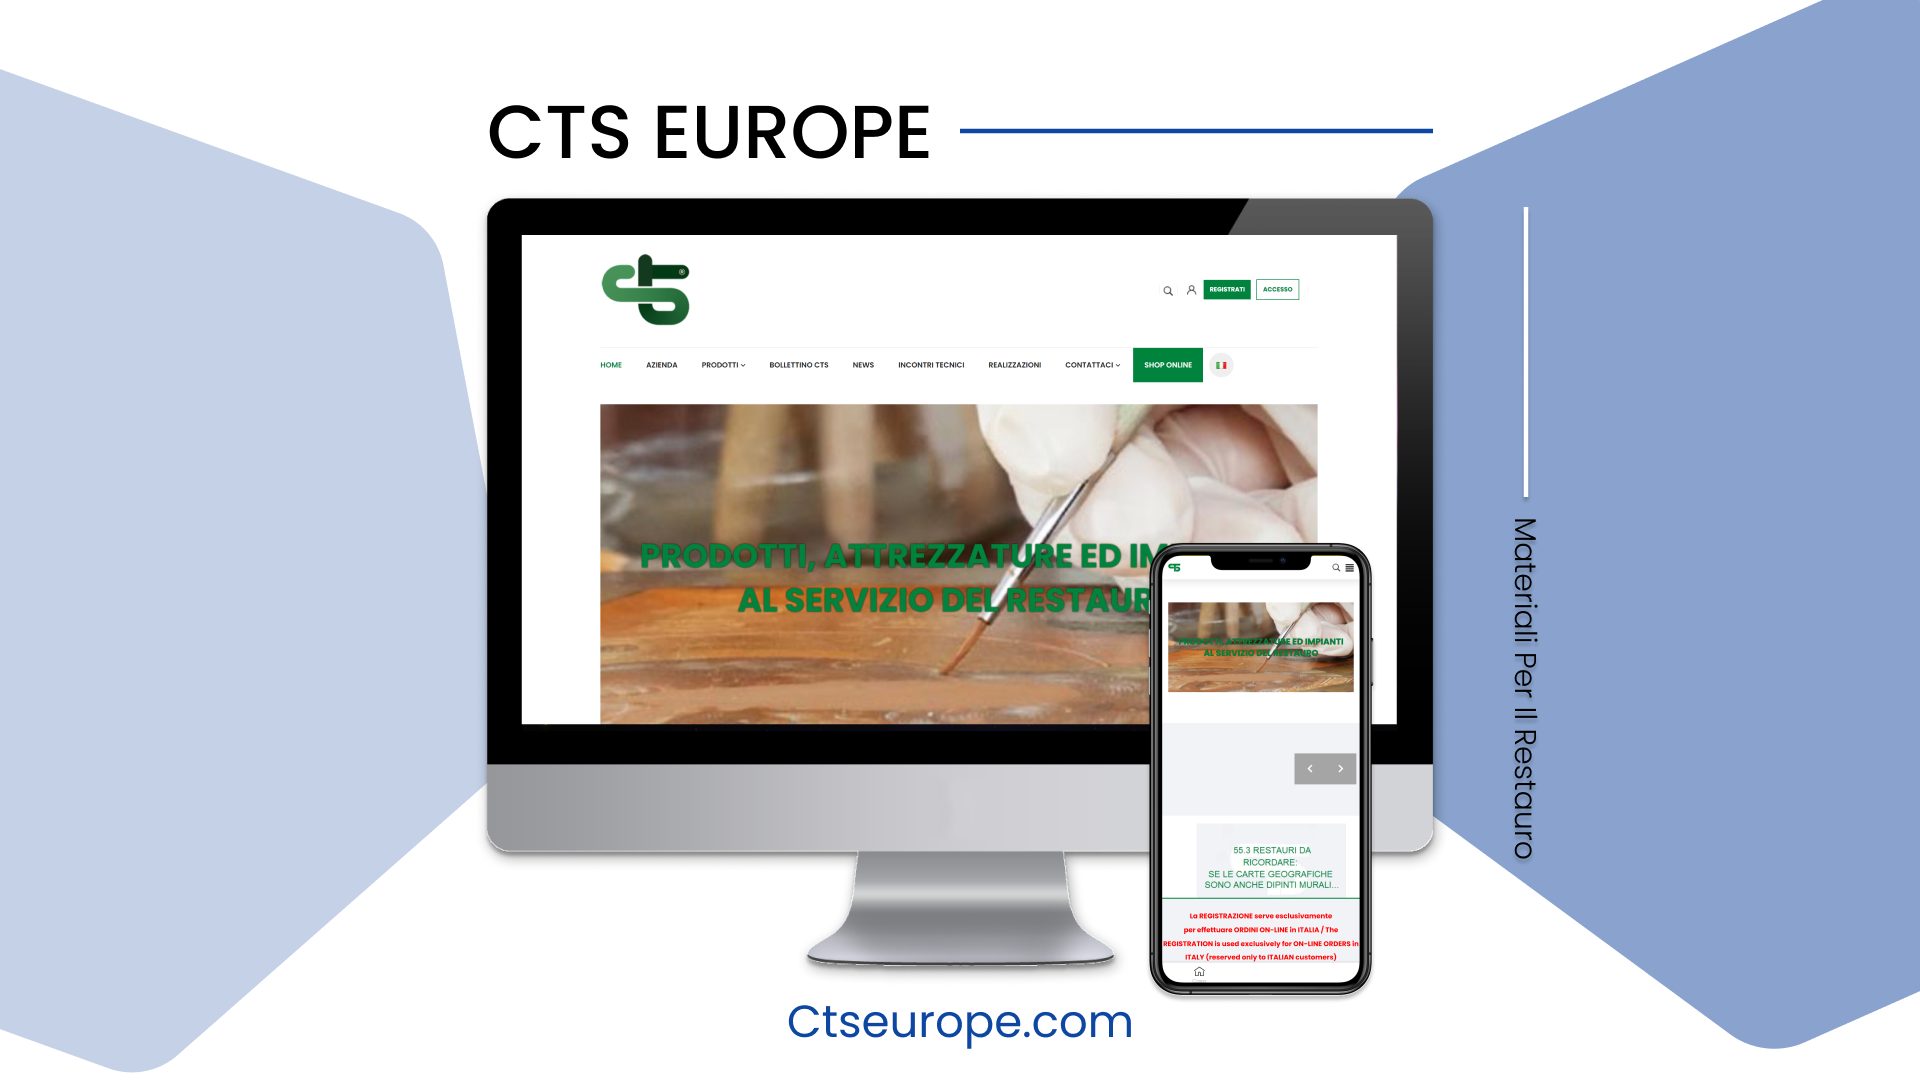 CTS Europe